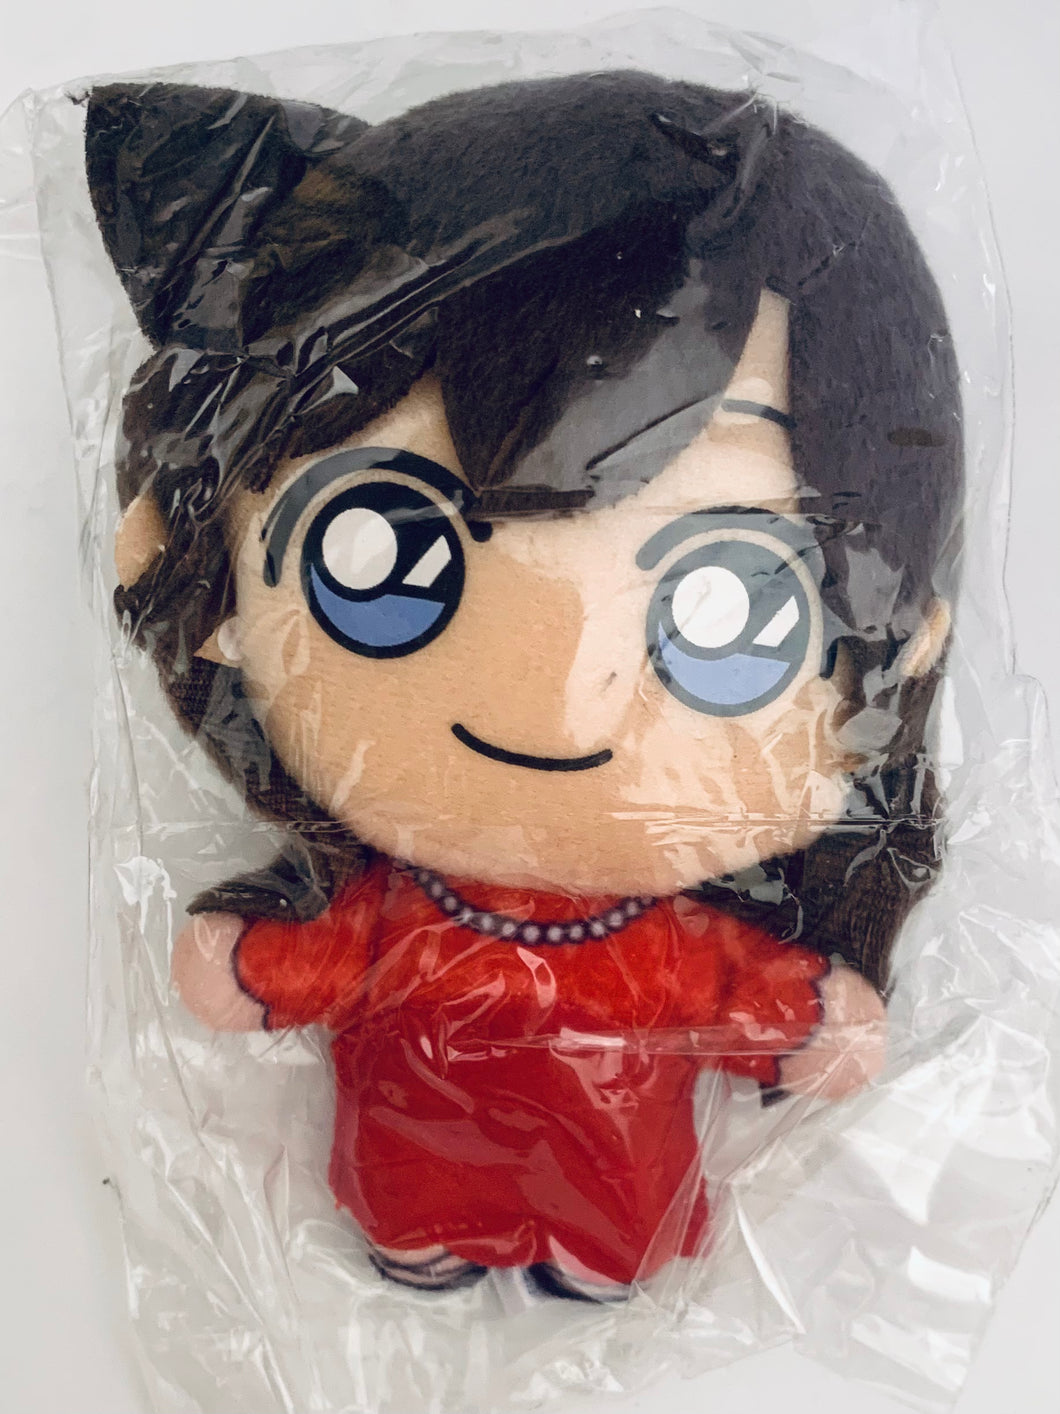 Detective Conan: The Scarlet Bullet - Mouri Ran - Stuffed Toy Mascot - Sega Lucky Lottery DC Red Party Collection (H Prize)